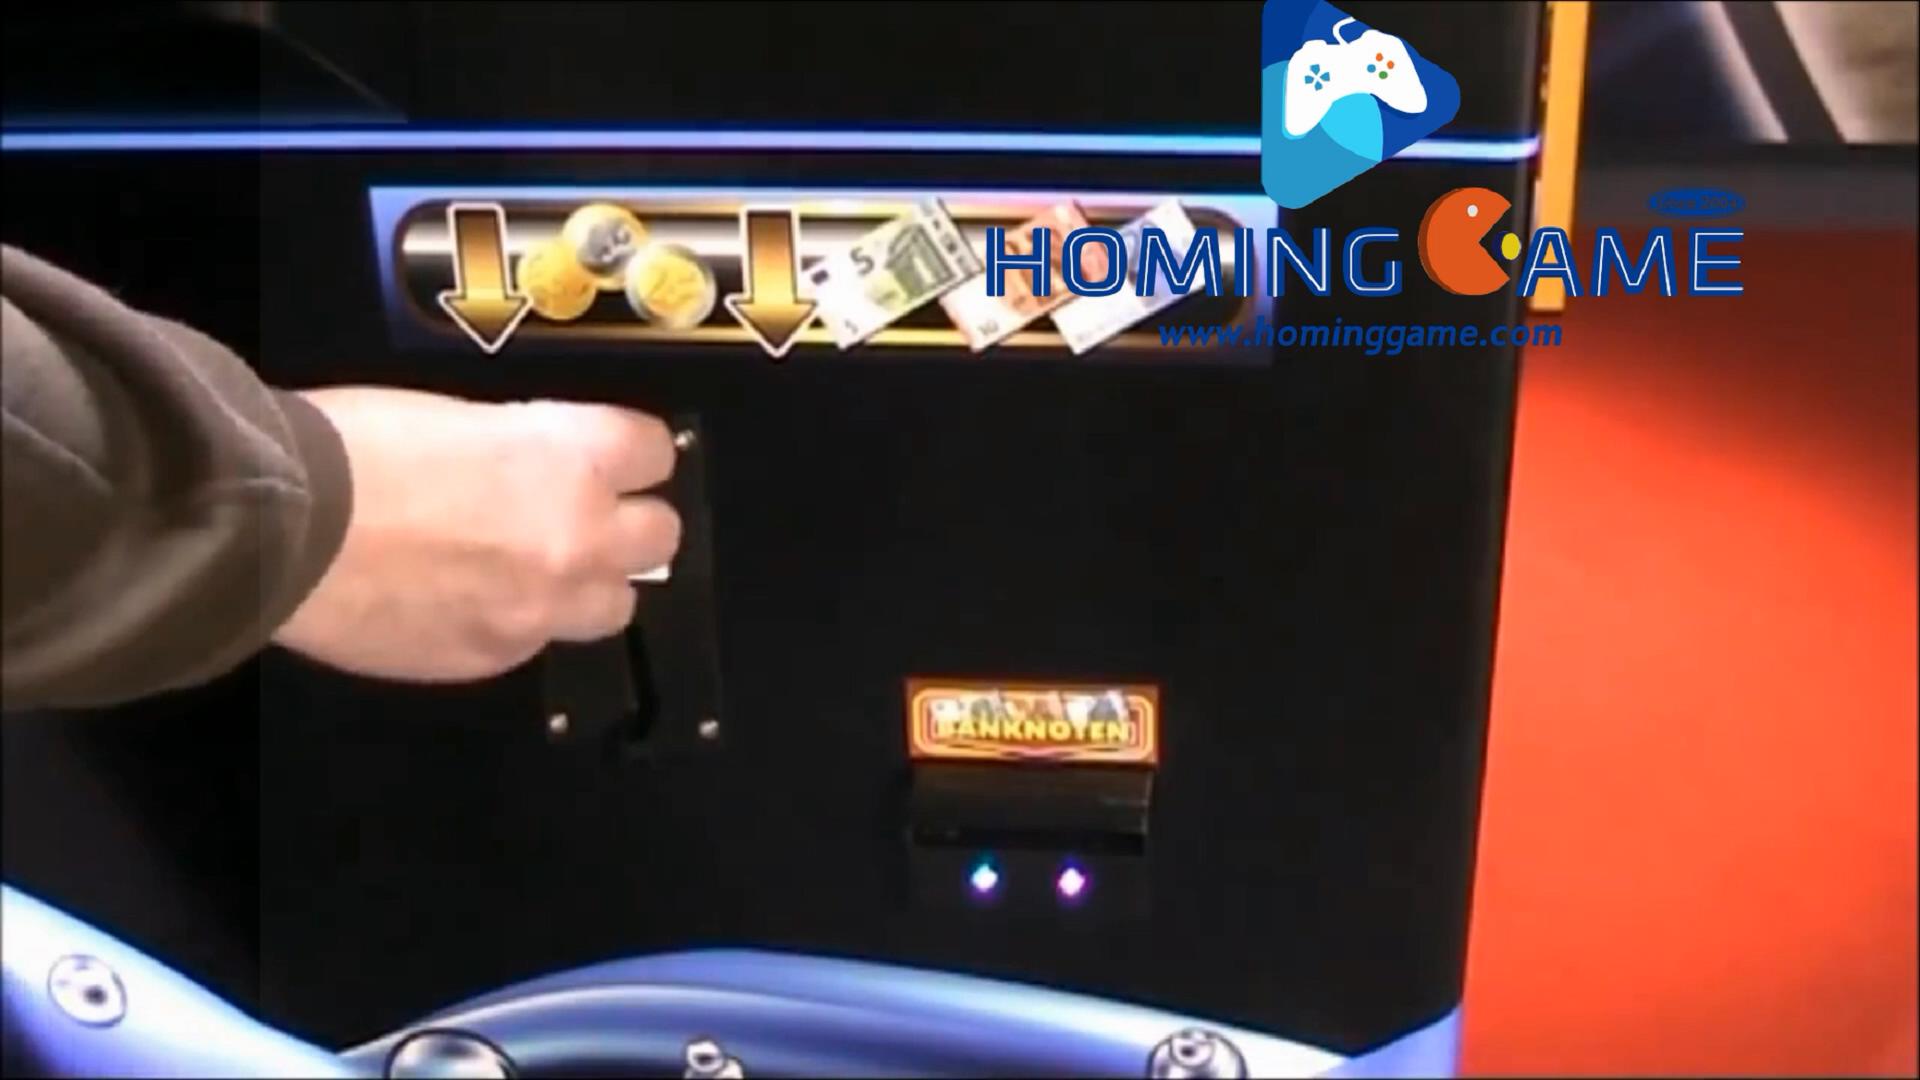 dolphin prize game,dolphin prize game machine,dolphin prize arcade game machine,icube prize game machine,icube prize redemption game machine,game machine,arcade game machine,coin operated game machine,indoor game machine,amusement park game equipment,game equipment,slot game machine,electrical game machine,hominggame,www.hominggame.com,gametube.hk,www.gametube.hk,entertainment game machine,amusement machine,slot game machine,crane machine,key master arcade game machine,key master game machine,winner cube prize game machine,super star prize game machine,lucky star prize game machine,vending machine,prize vending machine,magic arrow prize game machine